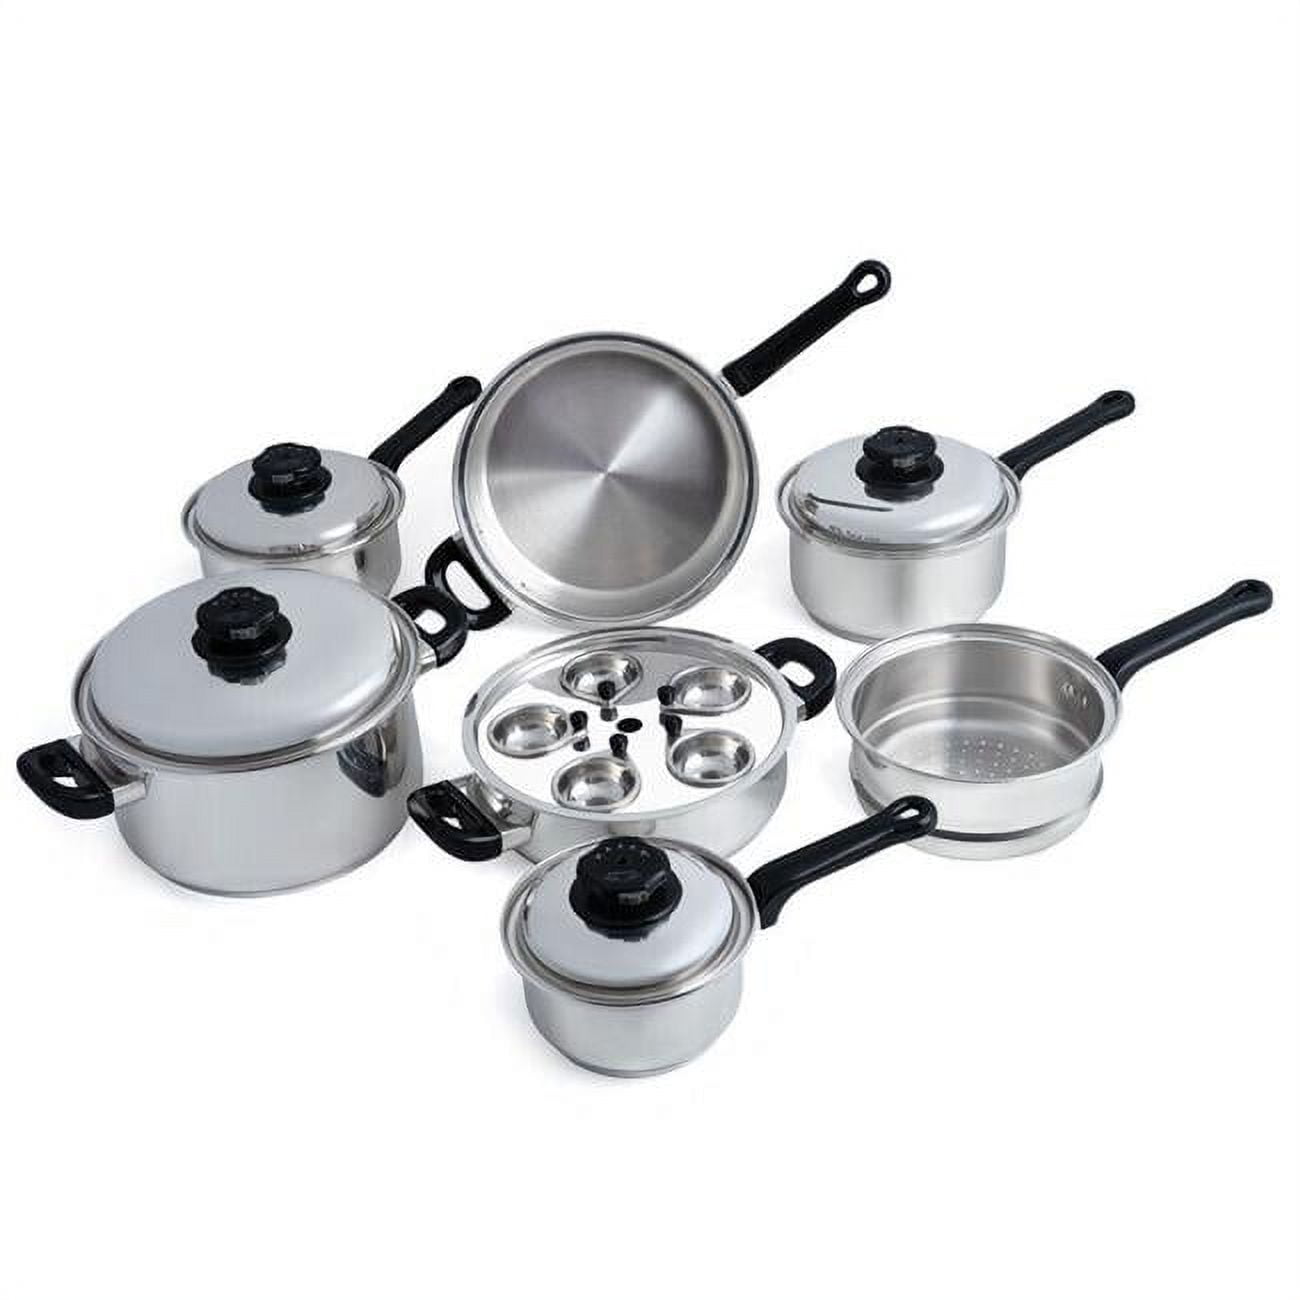 Picture of Maxam KT173 Stainless Steel Steam Control Cookware Set - 17 Piece